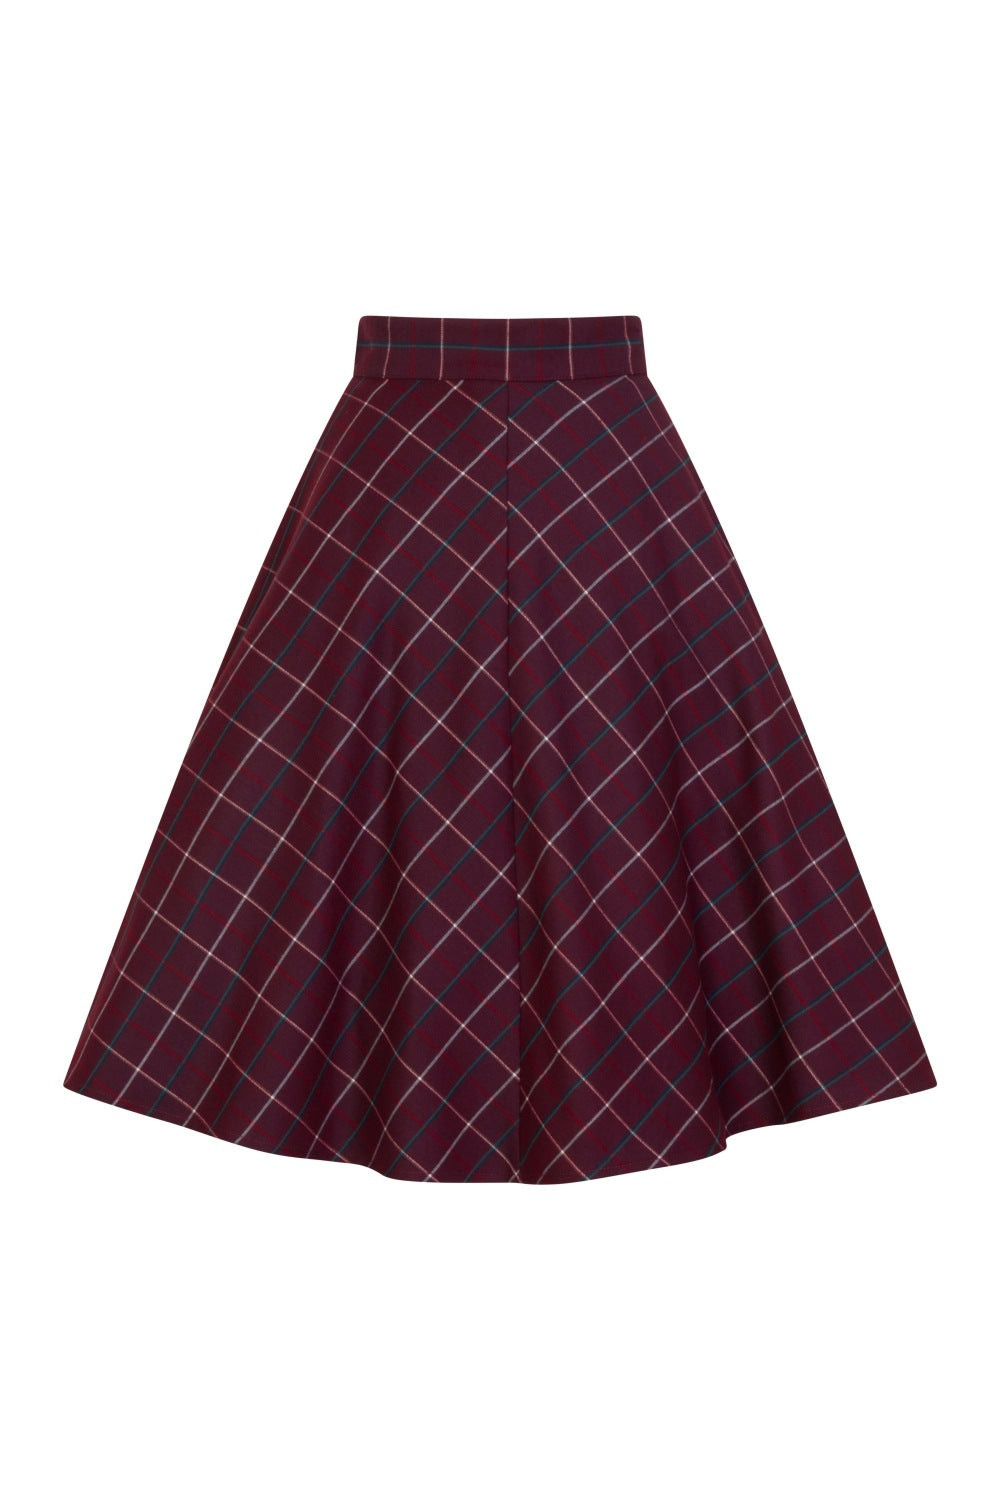 Back of the Maddy Swing Skirt in Plum